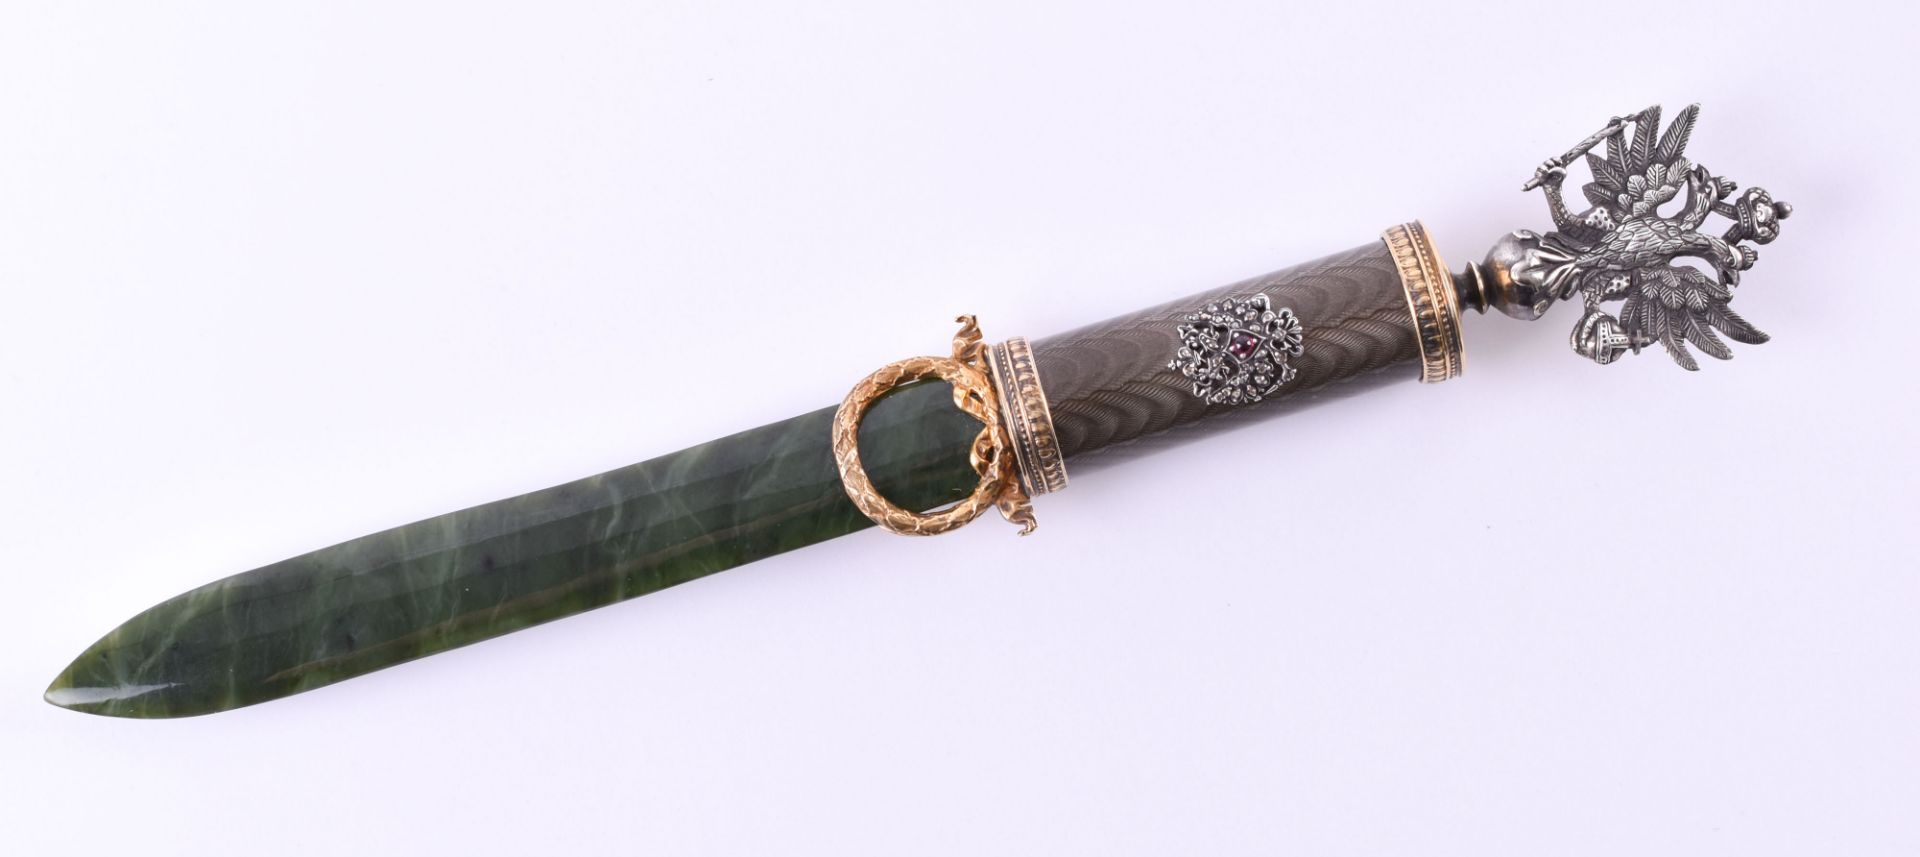 Letter opener Russiasilver 84 zolotnik gilded, the blade is made of nephrite jade, handle with